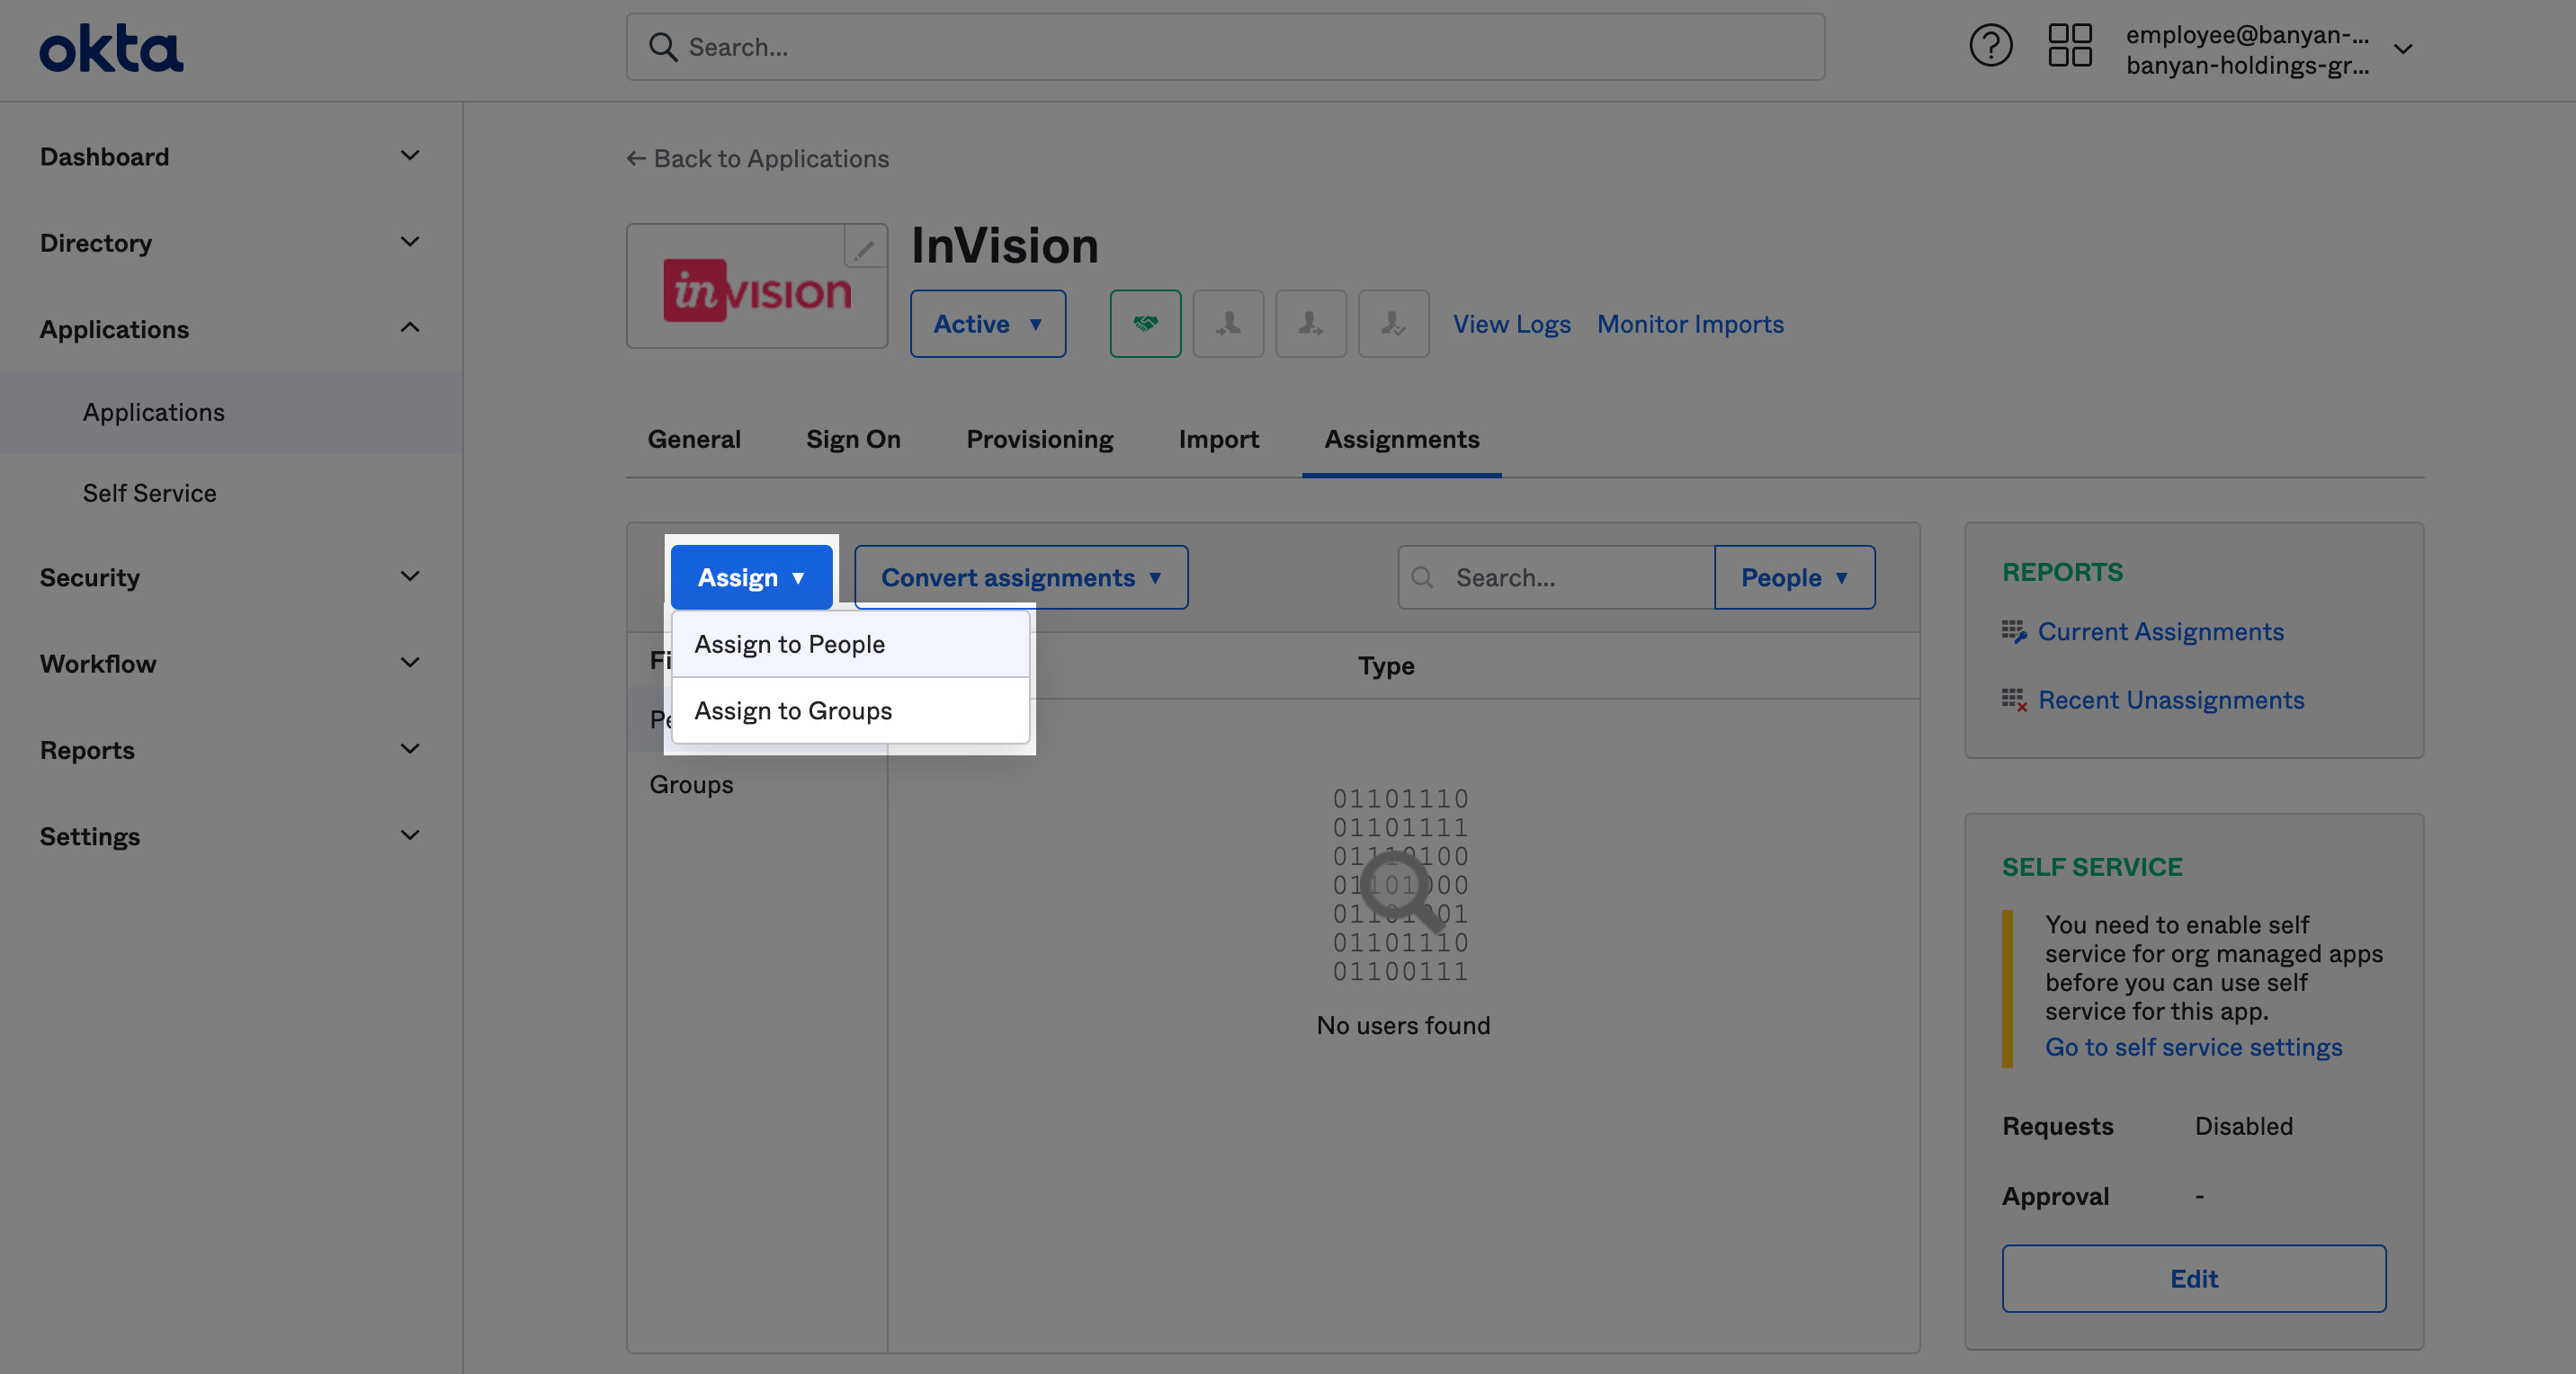 invision-sso-okta-setup-assign-invision-app-to-users-or-groups.png